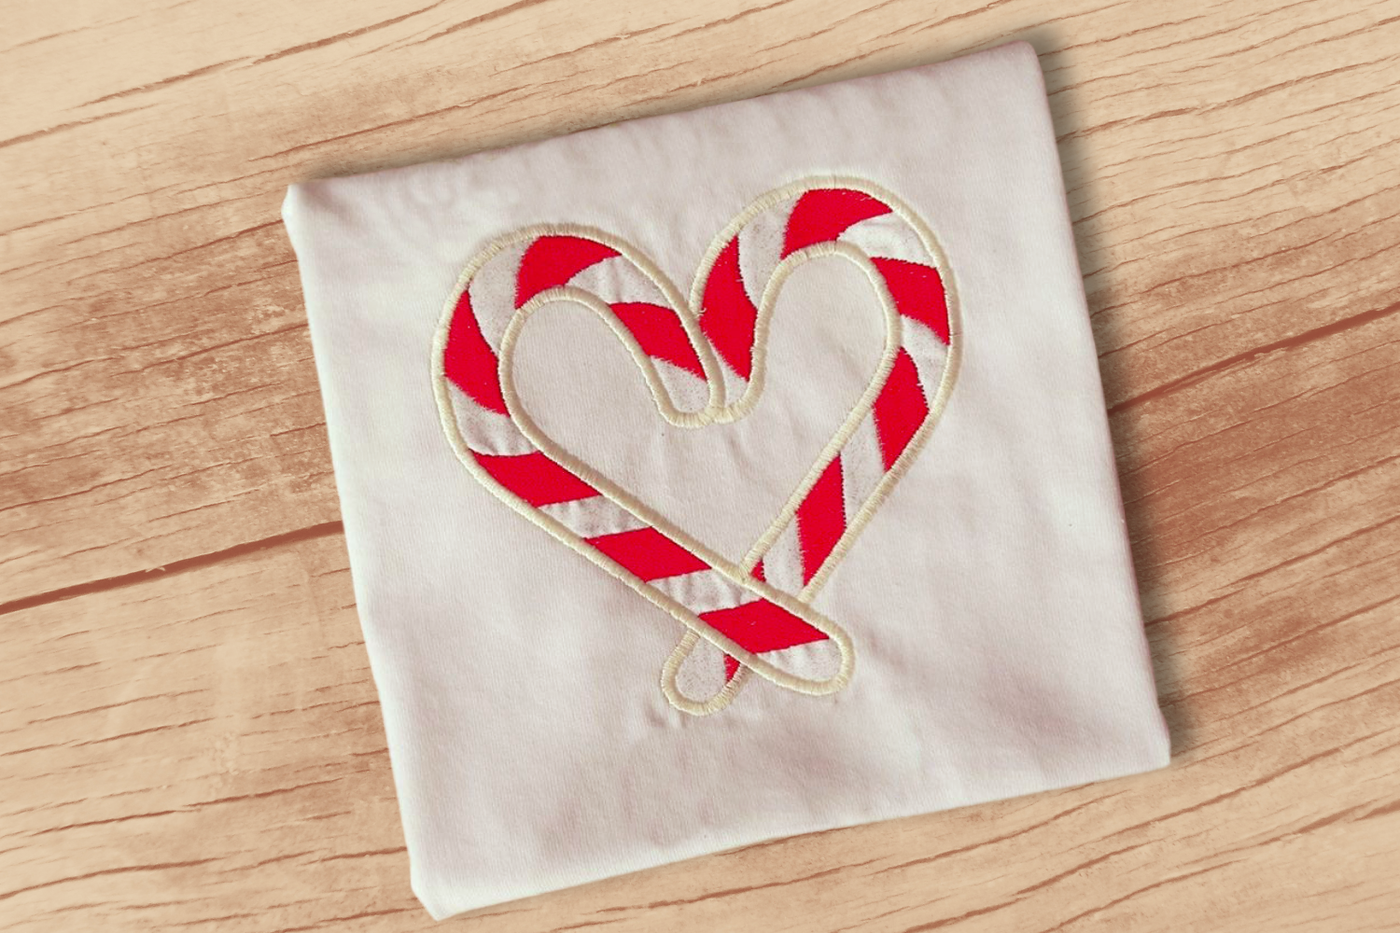 A white square of fabric has a heart applique design. The heart is formed by two red and white striped candy canes.